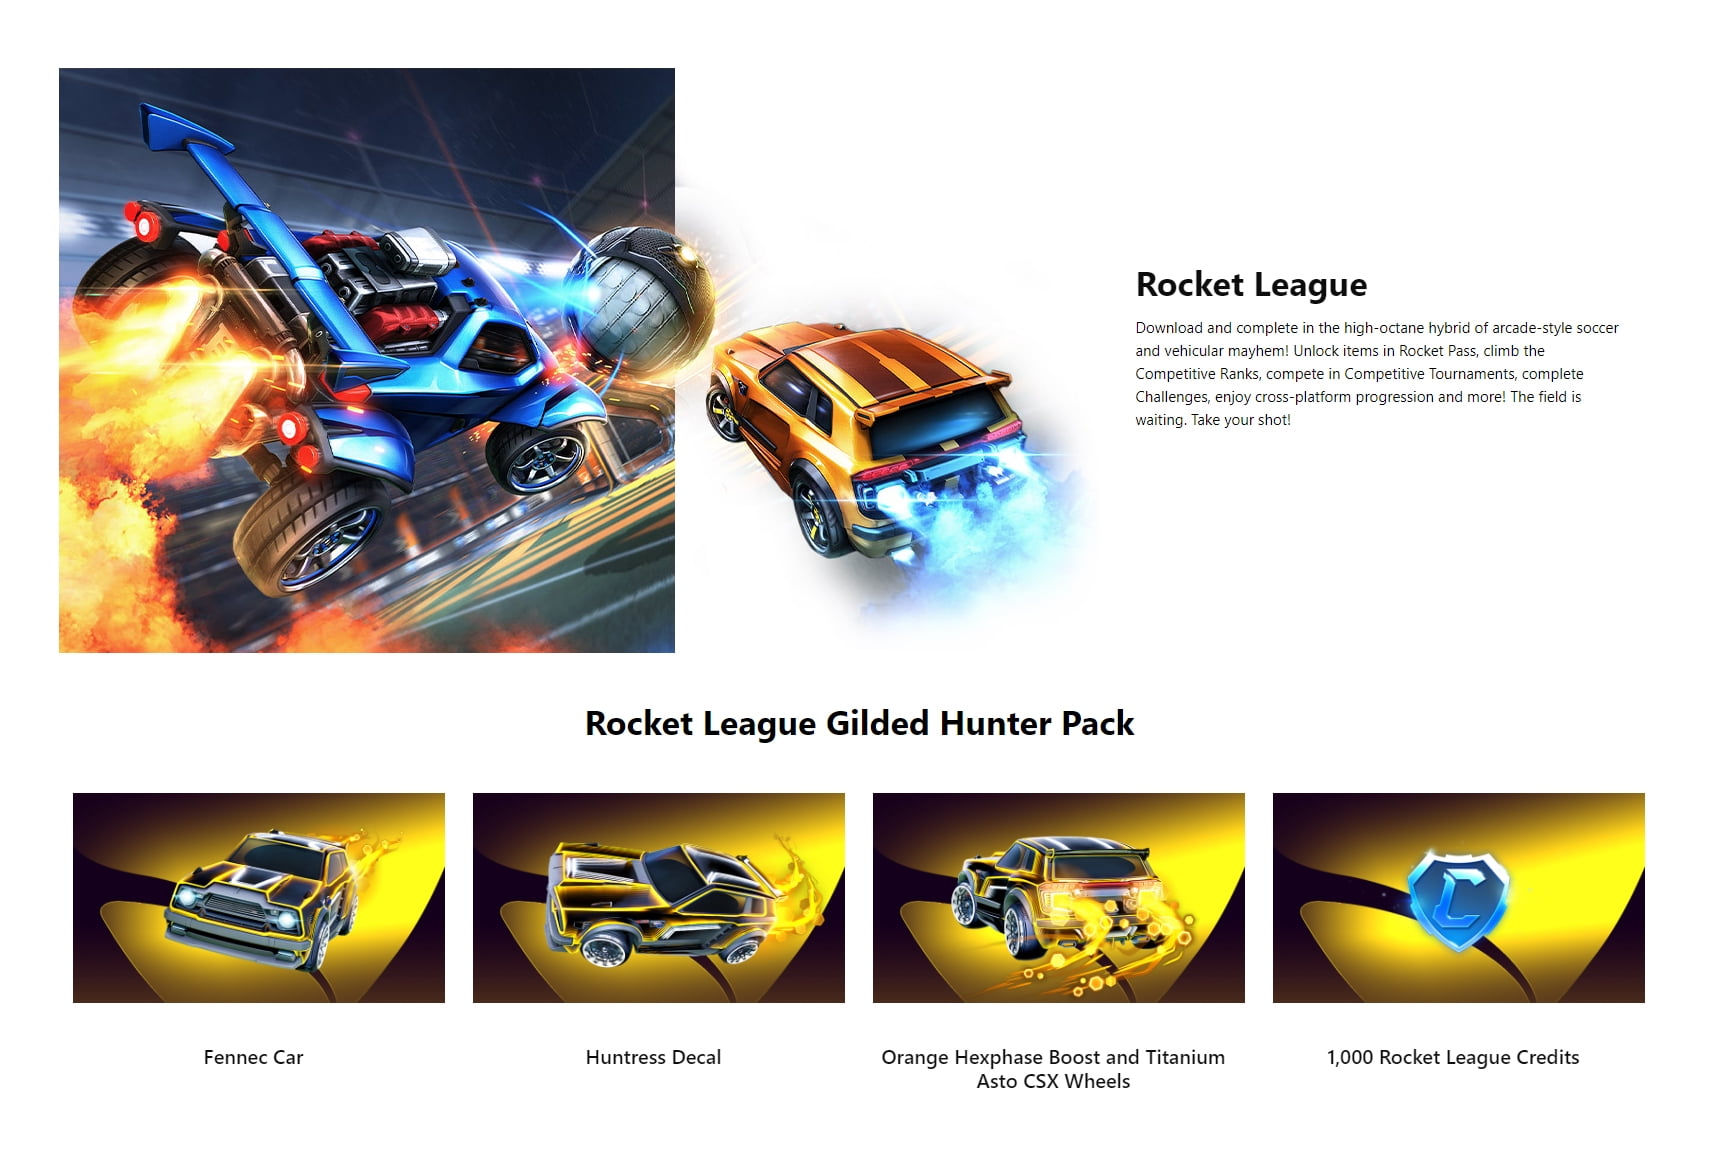 Fortnite & Rocket League Bundle with Xbox Game Pass Ultimate: 1 Month